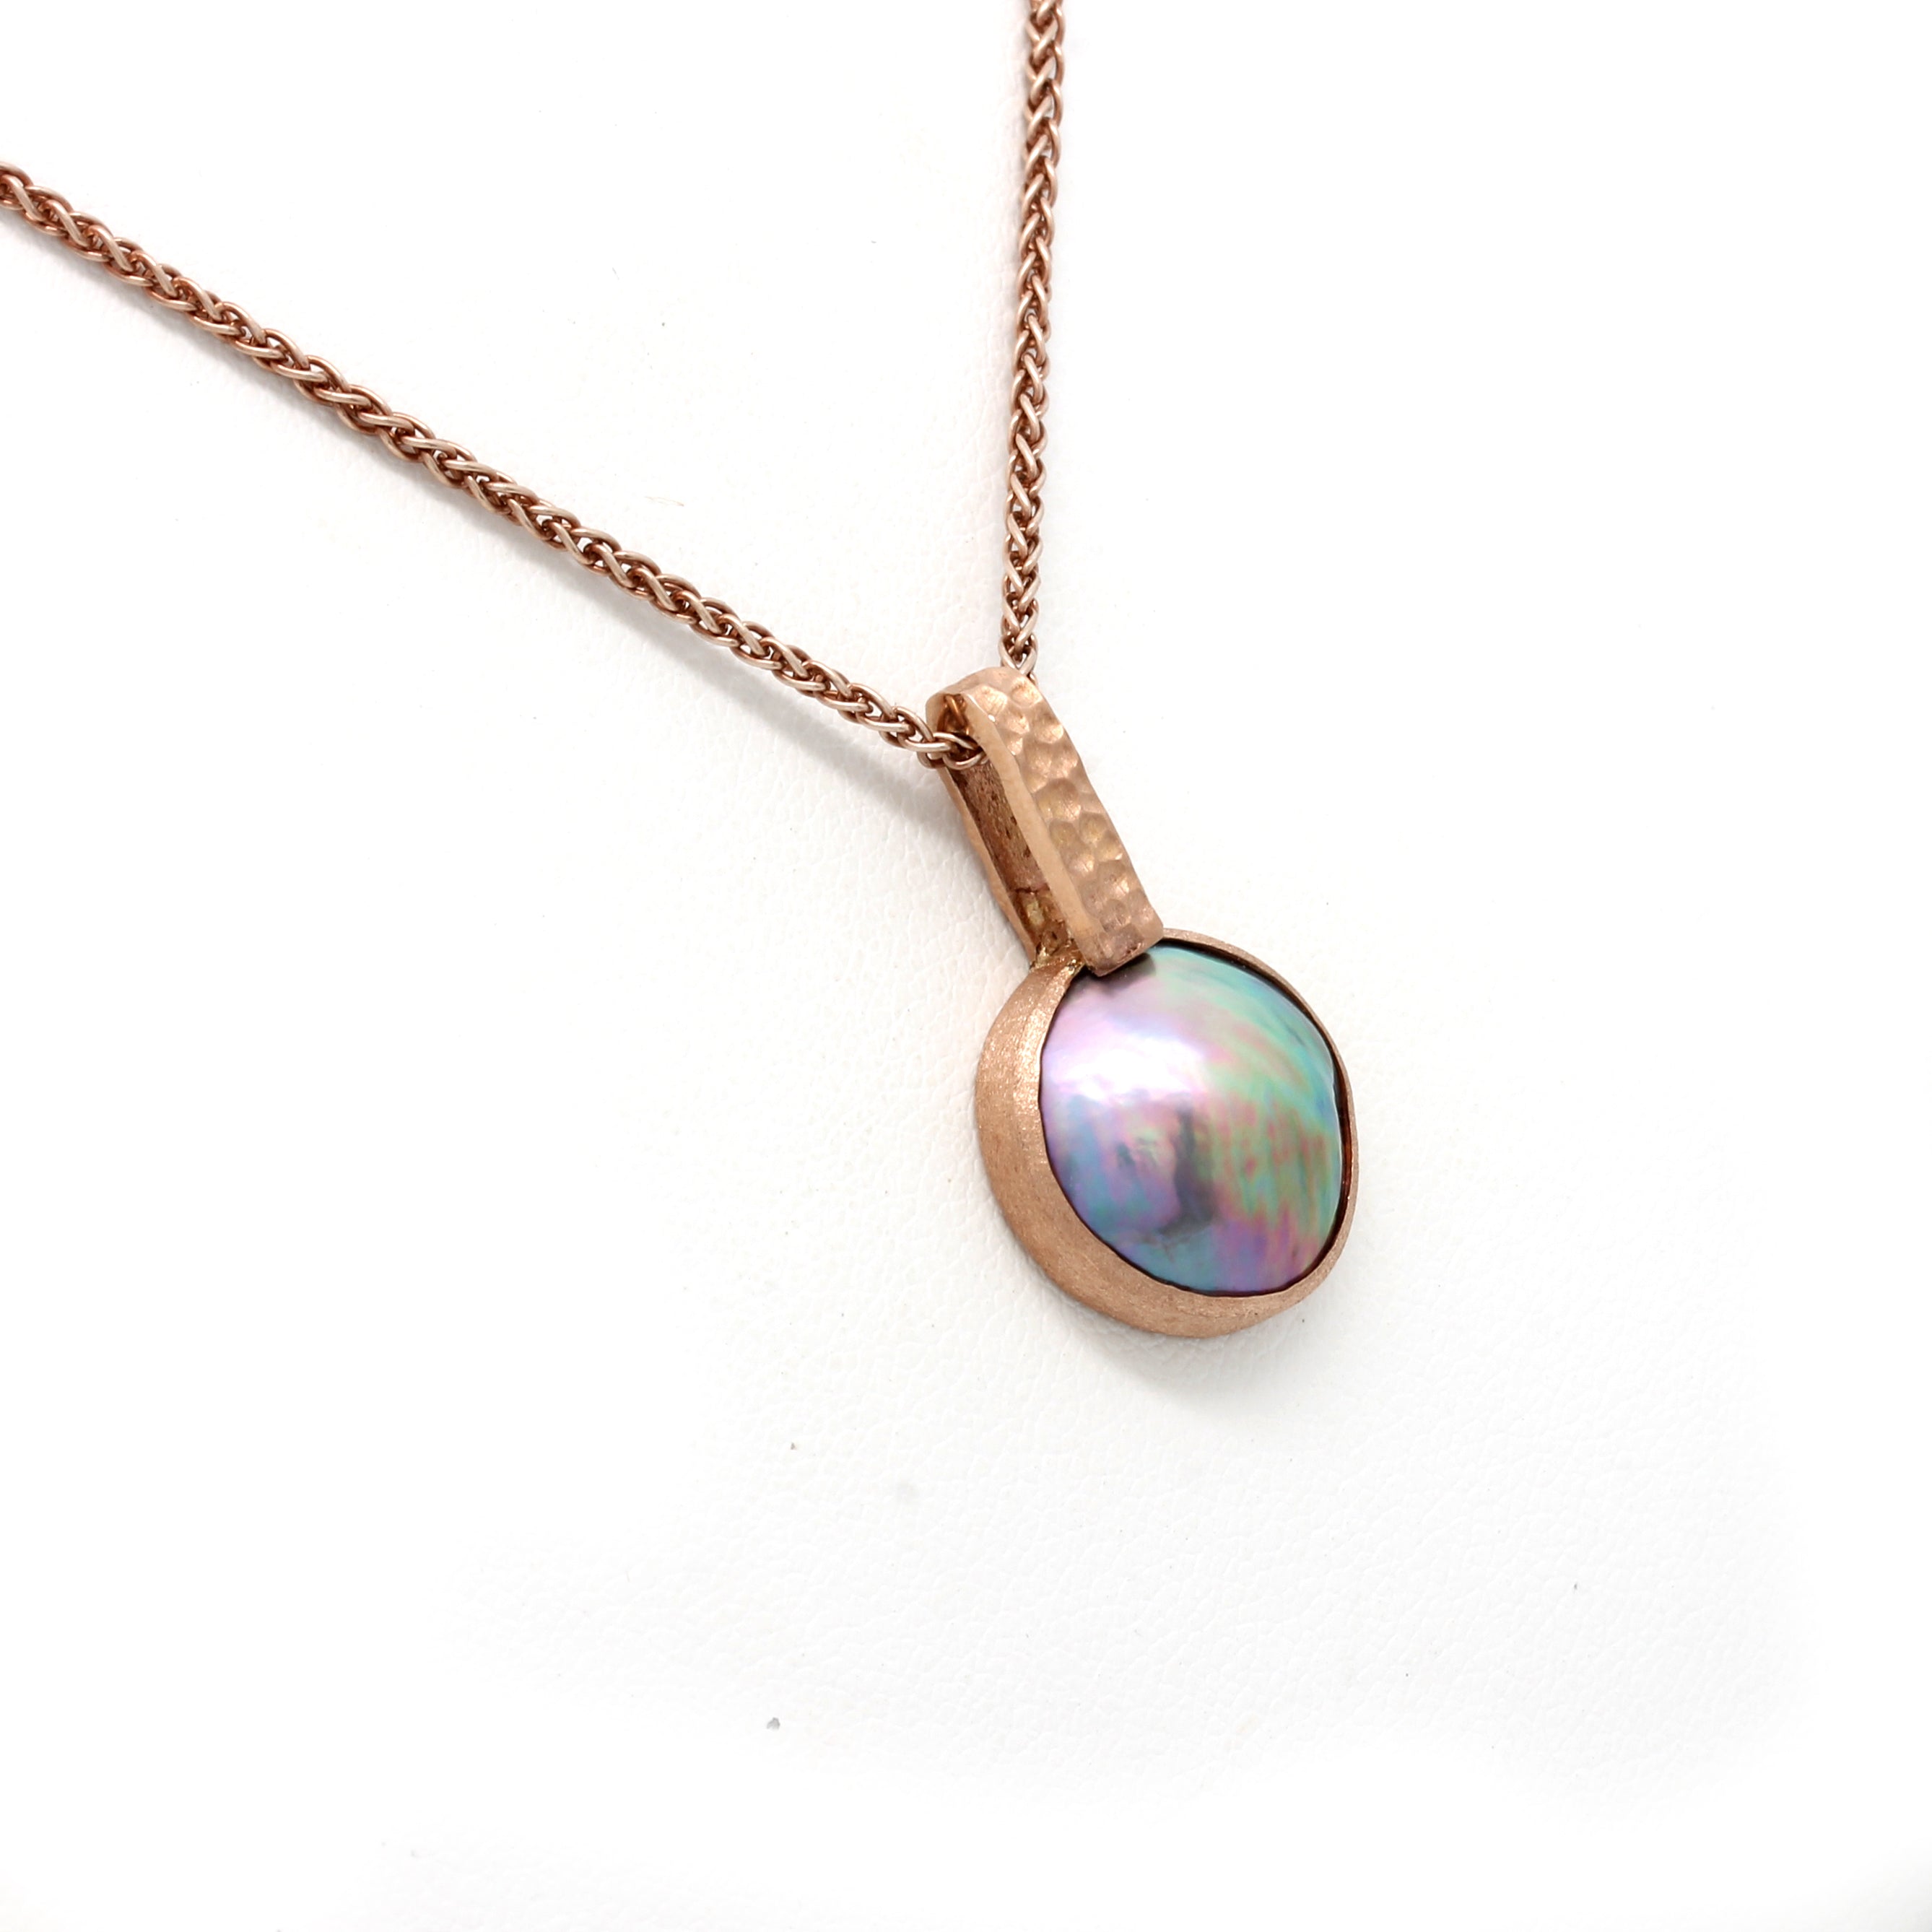 14K Rose Gold & Cortez Mabe Pearl Pendant by Kathe Mai